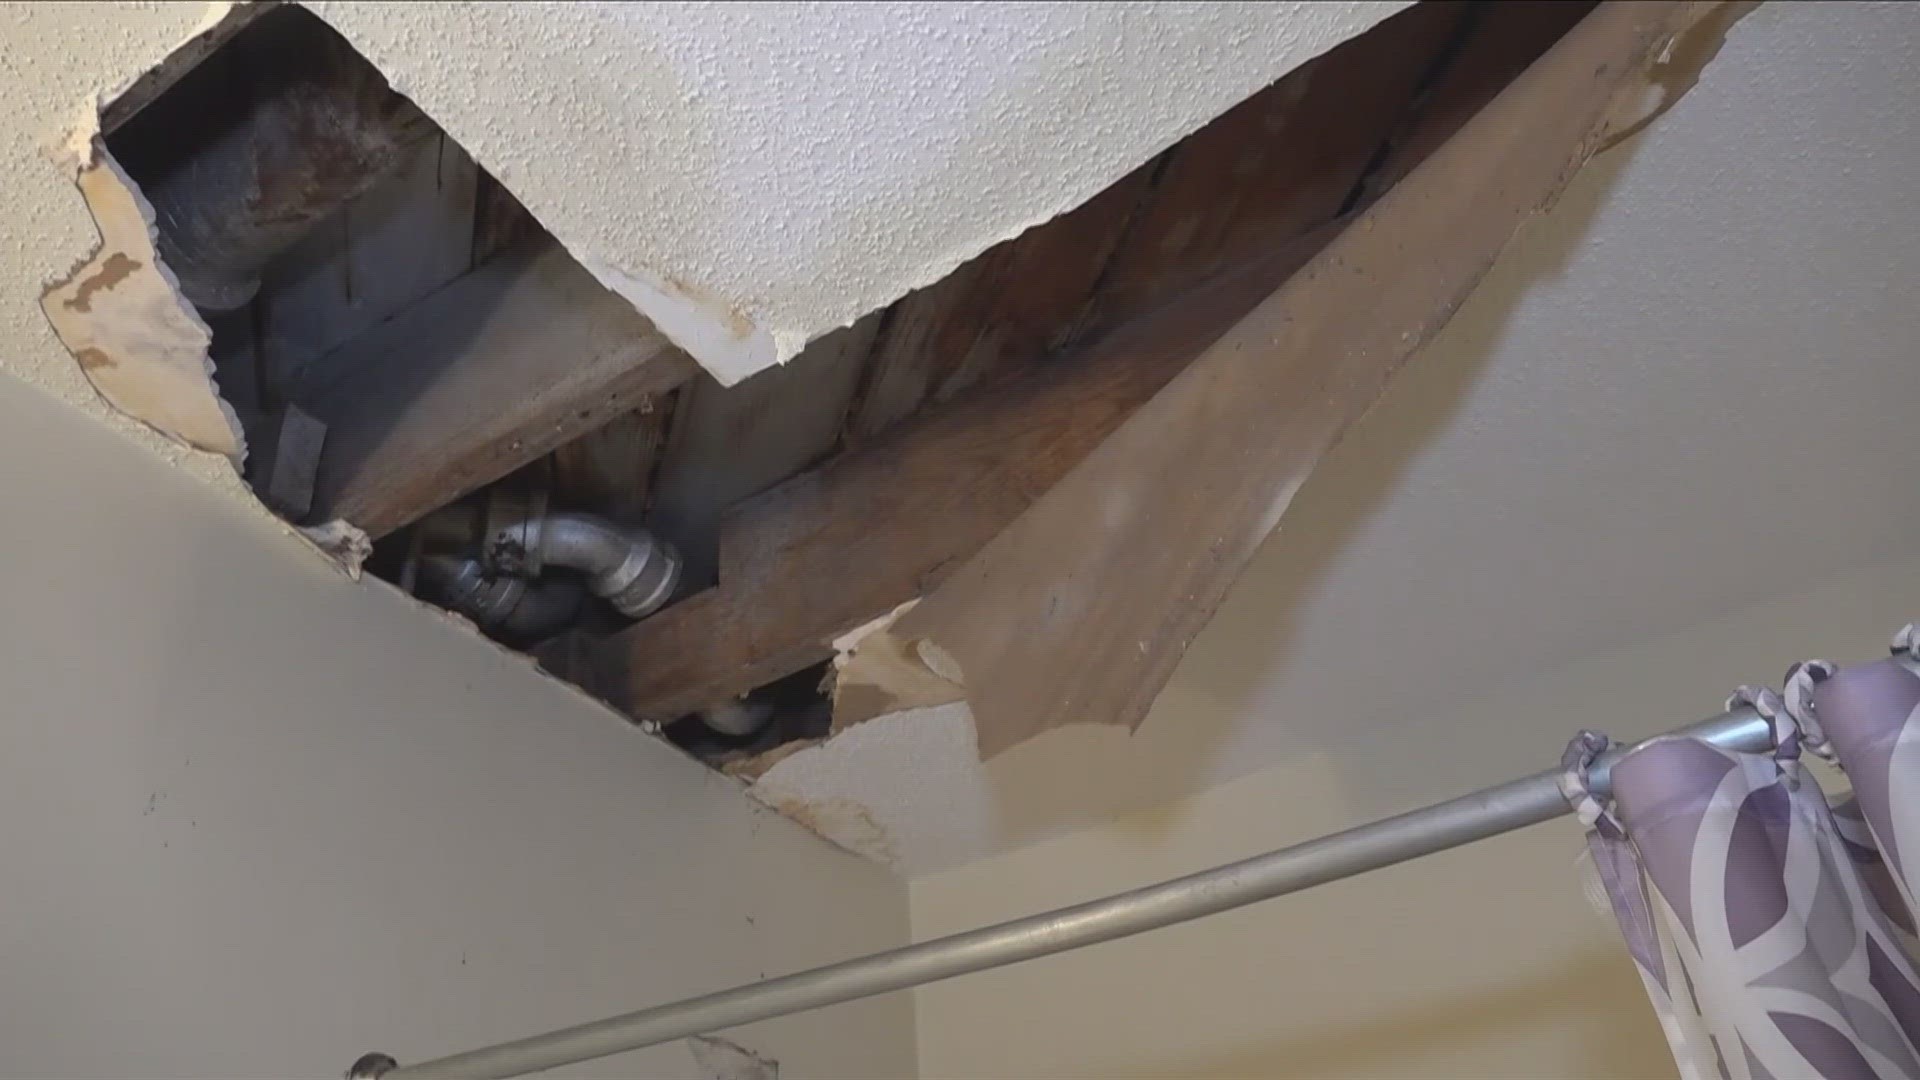 South Memphis Apartment Has Caved In